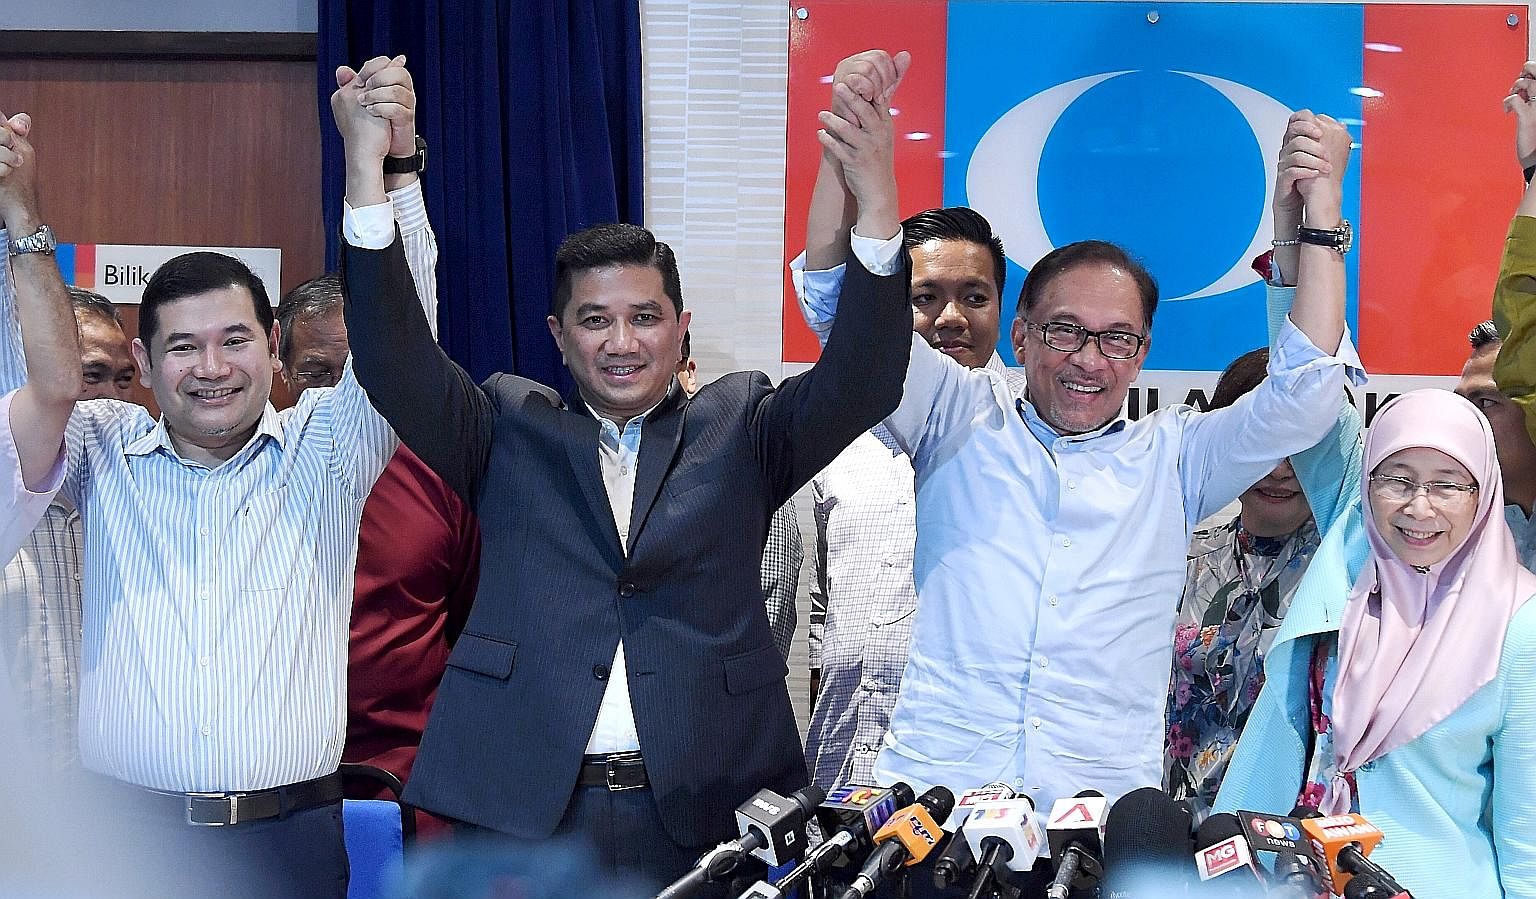 PKR president Anwar Ibrahim and PKR deputy president Azmin Ali, with PKR vice-president Rafizi Ramli (far left) and Mr Anwar's wife, Deputy Prime Minister Wan Azizah Wan Ismail, at a press conference on the Port Dickson by-election at the party's hea